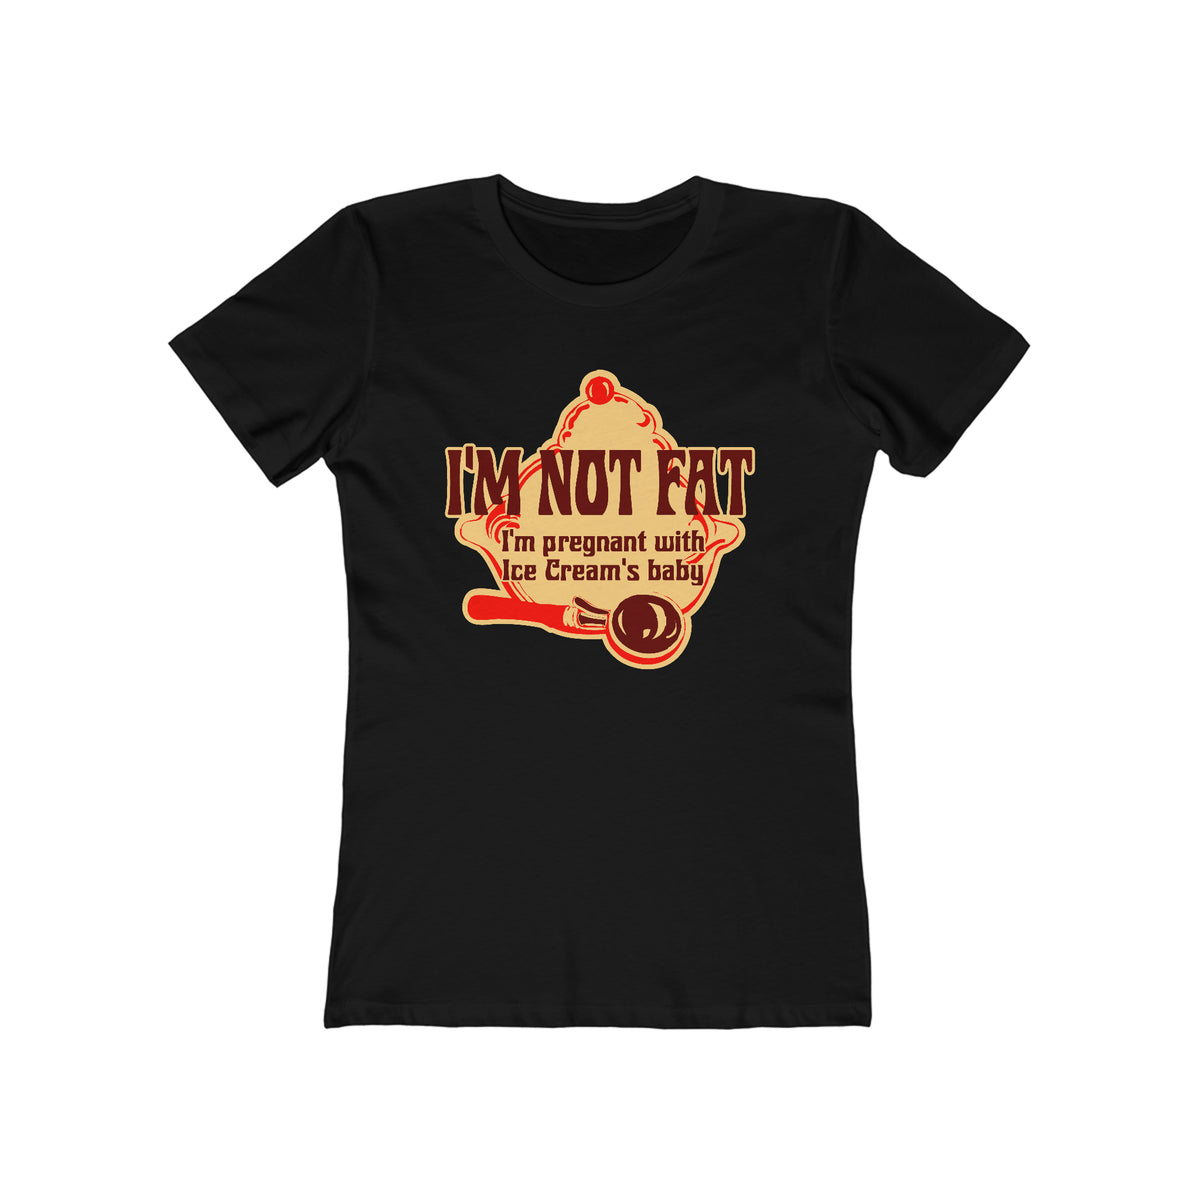 I'm Not Fat - I'm Pregnant With Ice Cream's Baby - Women’s T-Shirt